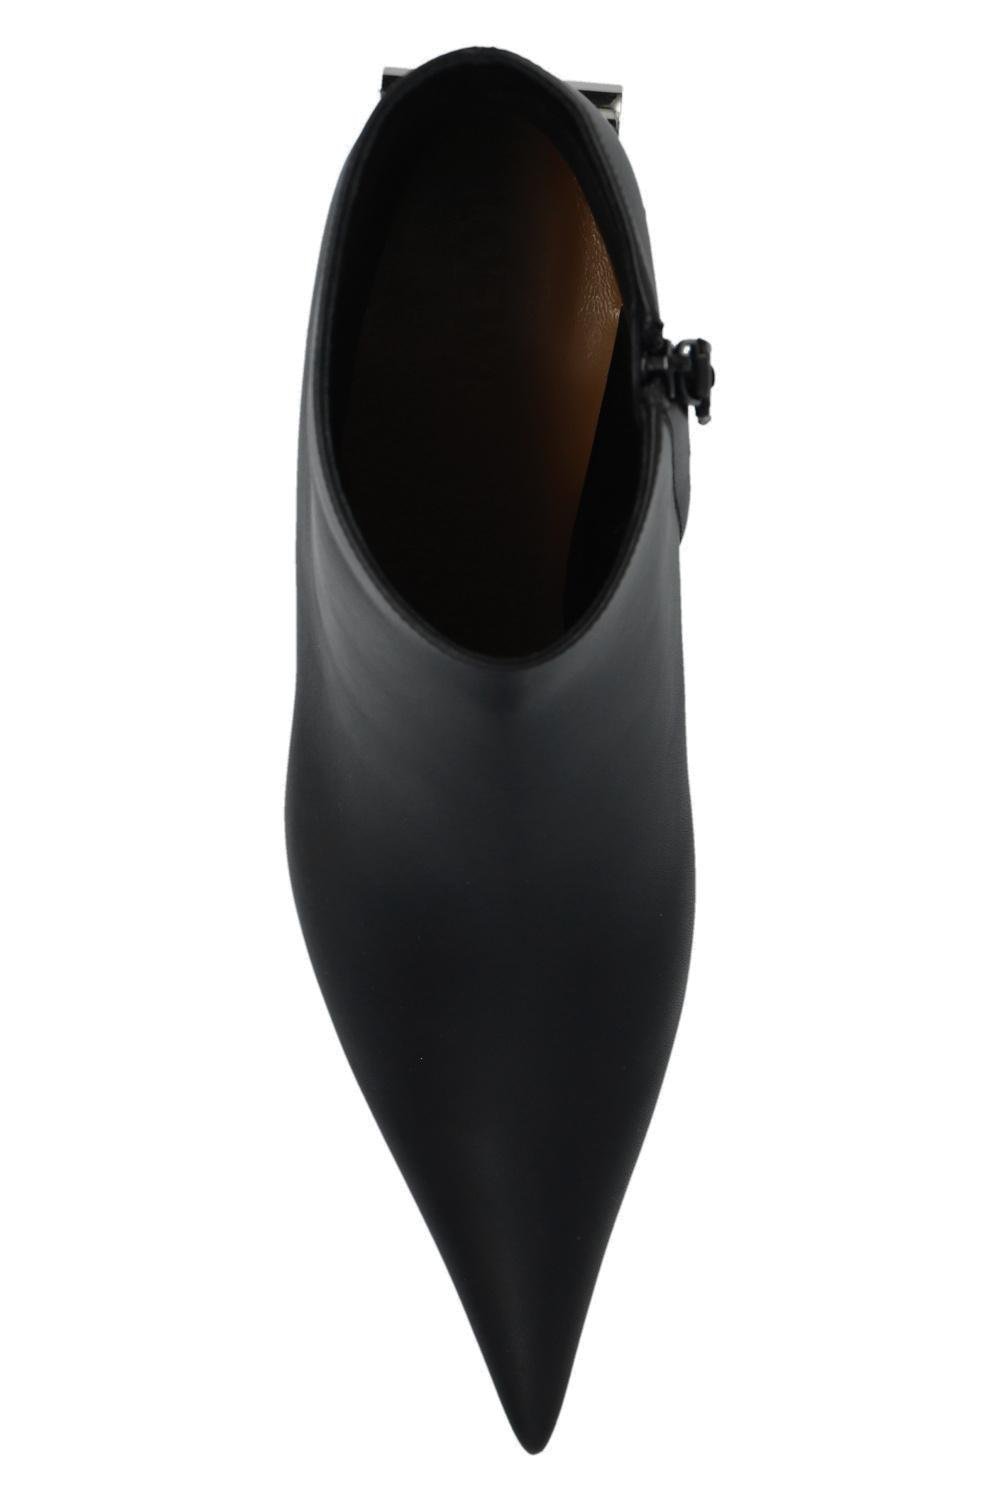 Loewe Anagram Heeled Pointed-Toe Ankle Boots